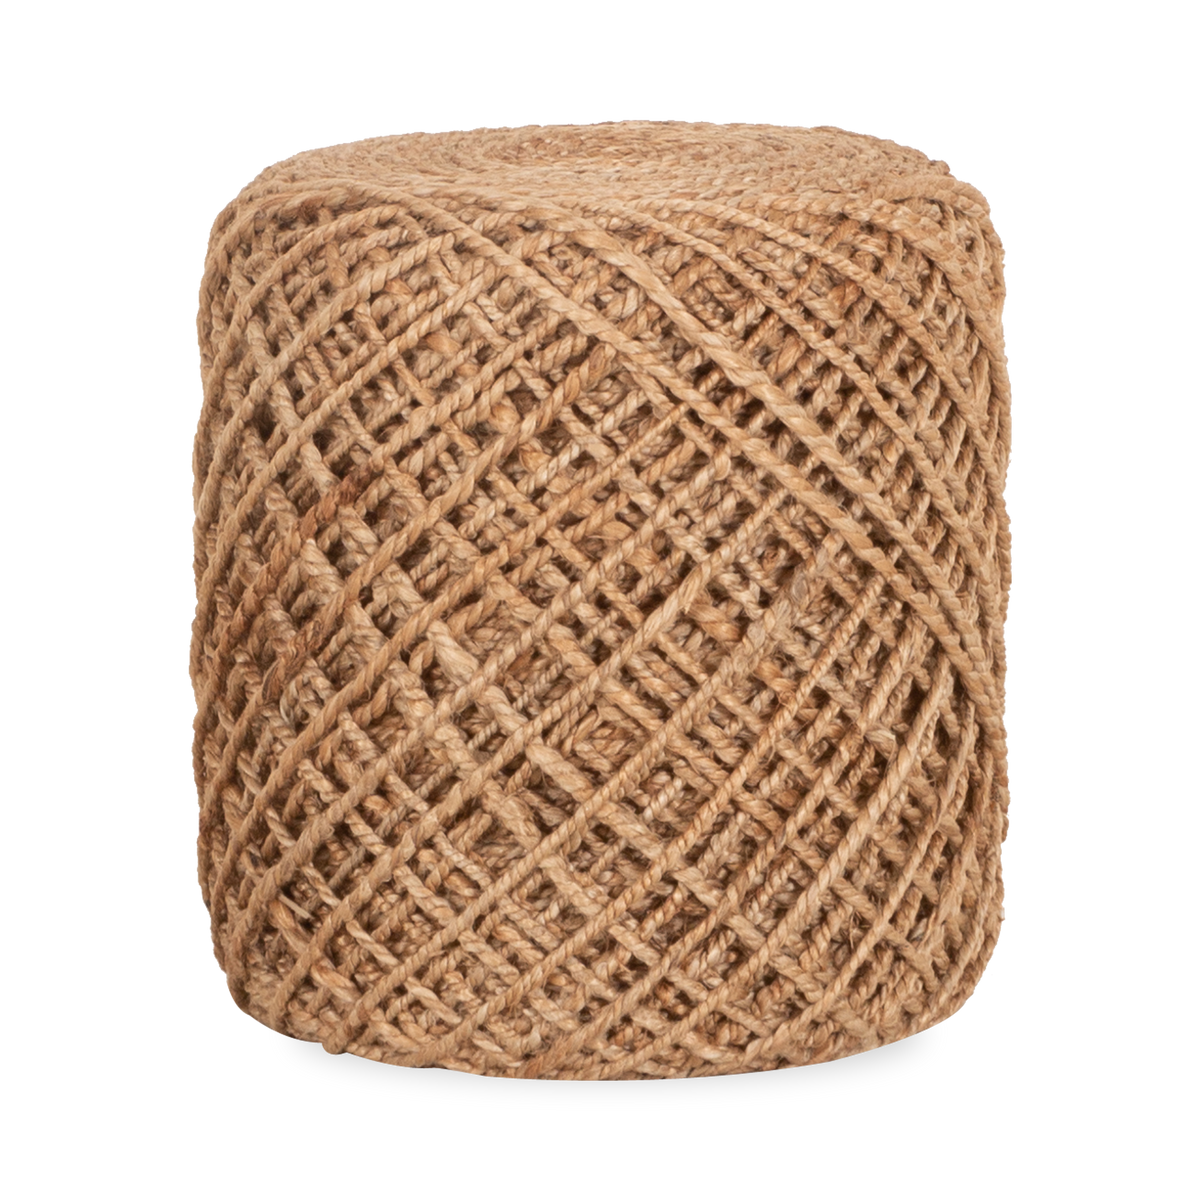 Expertly handwoven, the Spool Ottoman spins textured wool into a whimsical design.